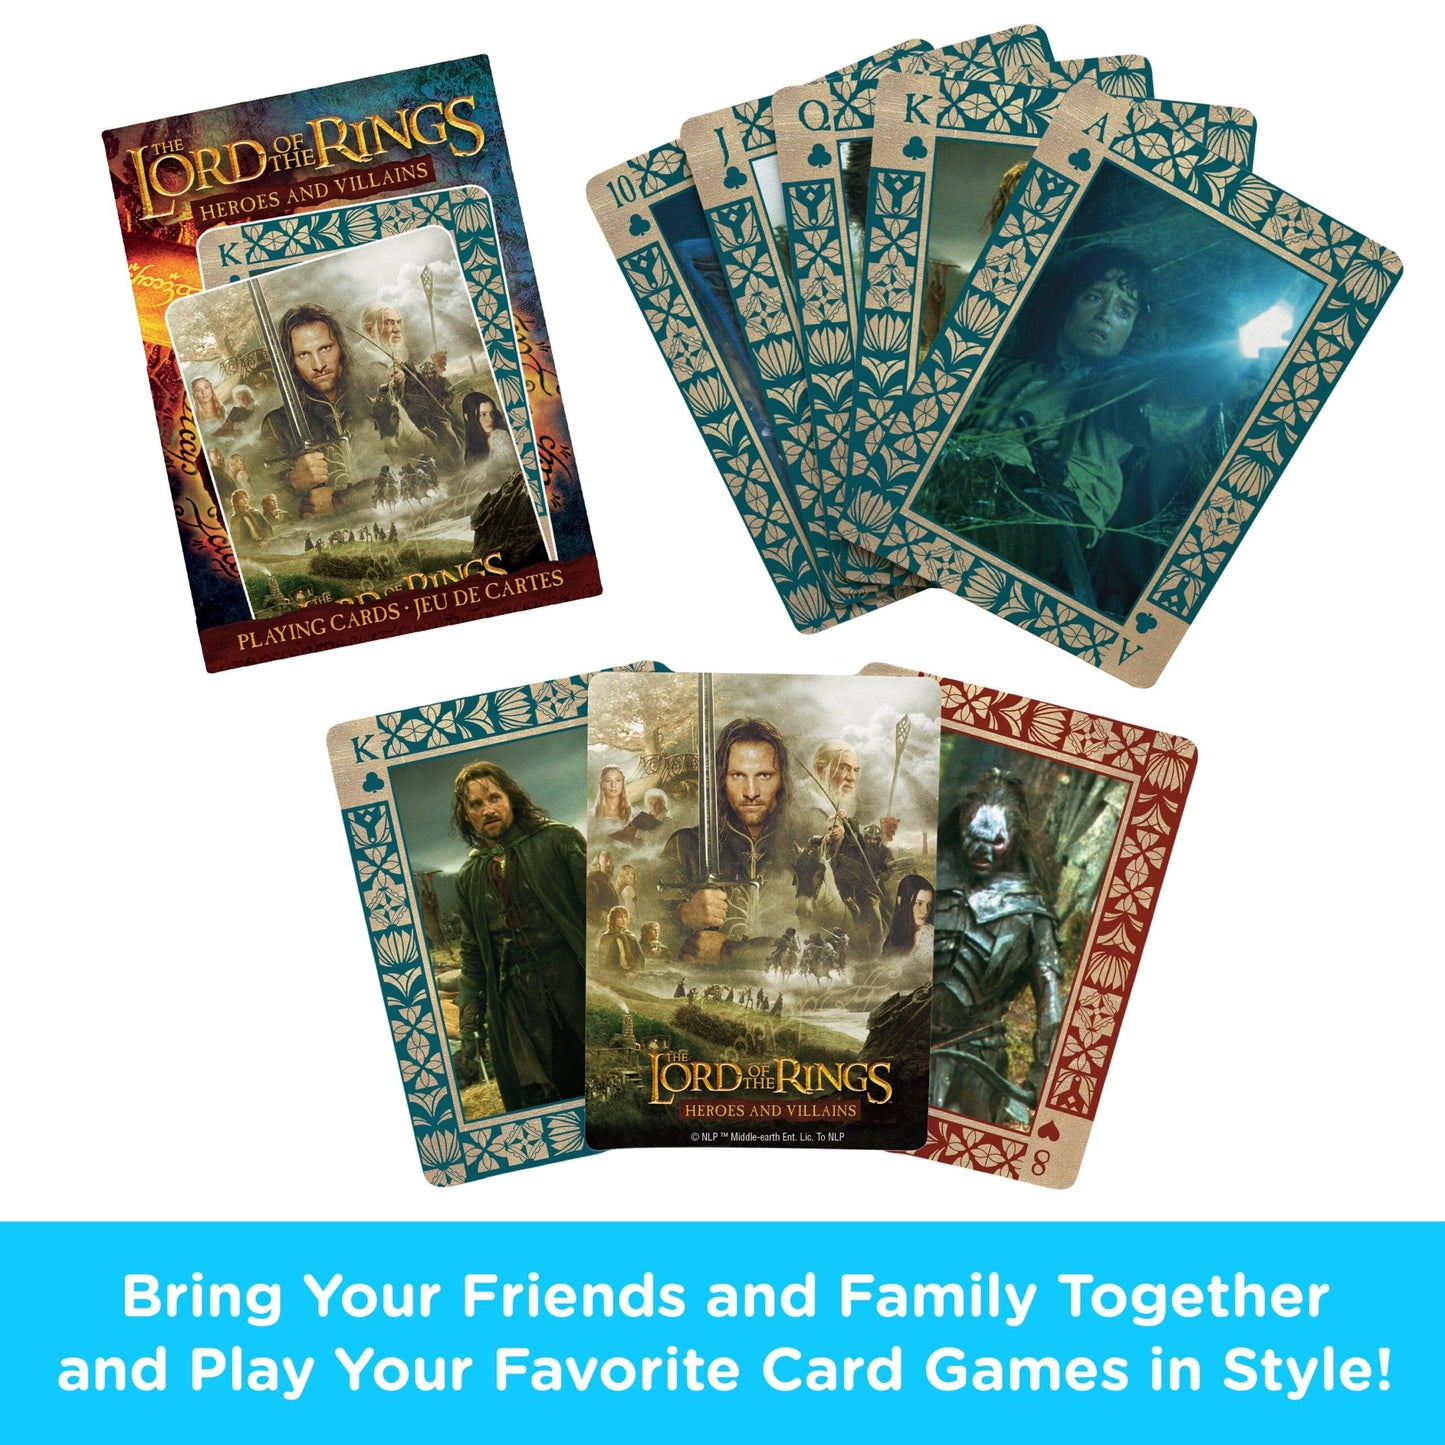 Lord of the Rings – Heroes and Villains Playing Cards